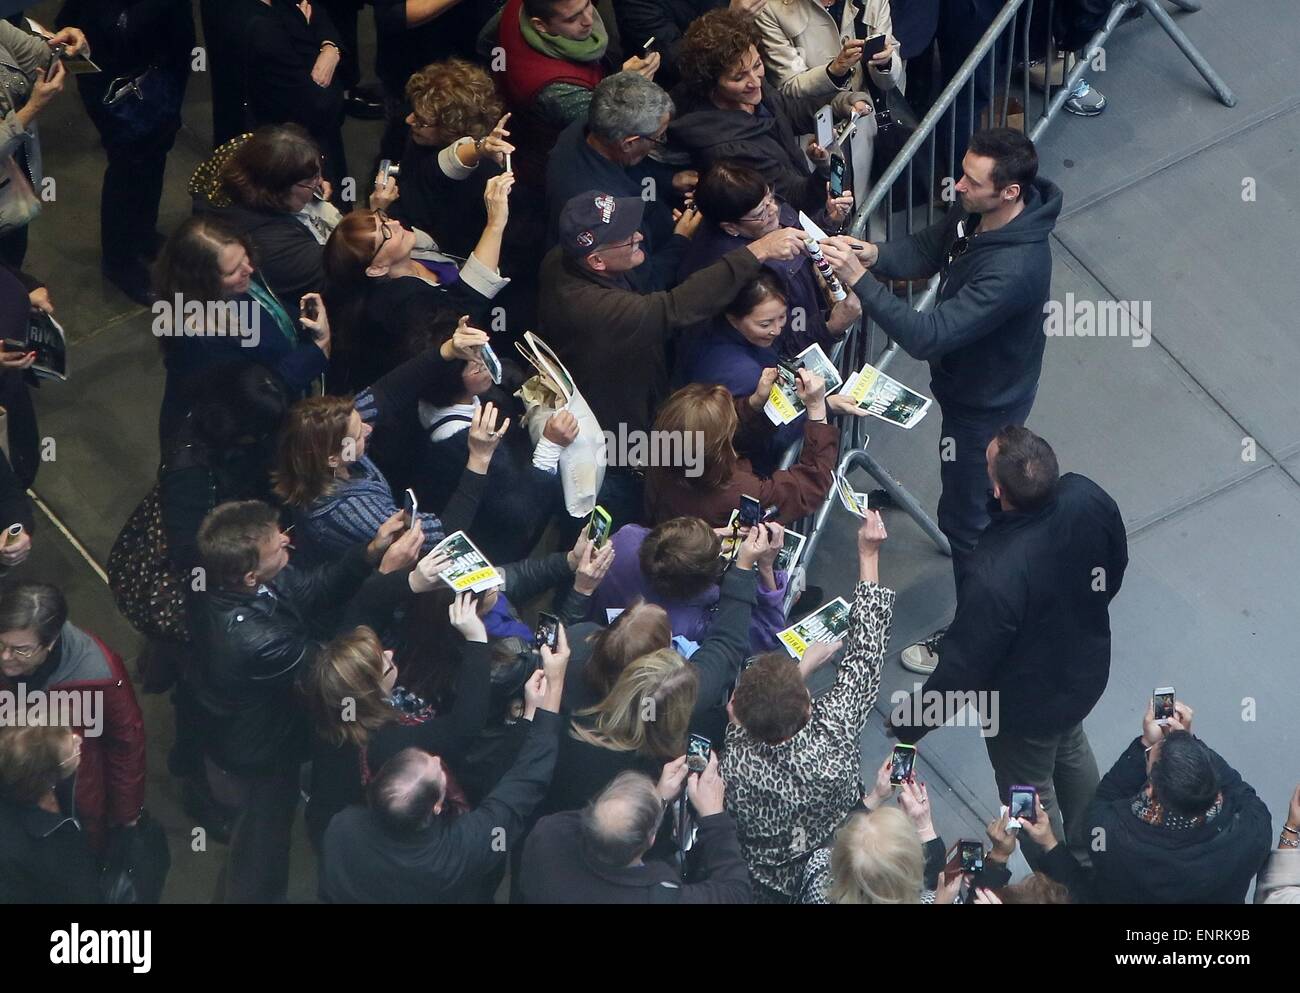 Hugh Jackman greets fans after the Broadway matinee of his new show 'The River' at the Circle in the Square Theatre  Featuring: Hugh Jackman Where: New York City, New York, United States When: 05 Nov 2014 Stock Photo